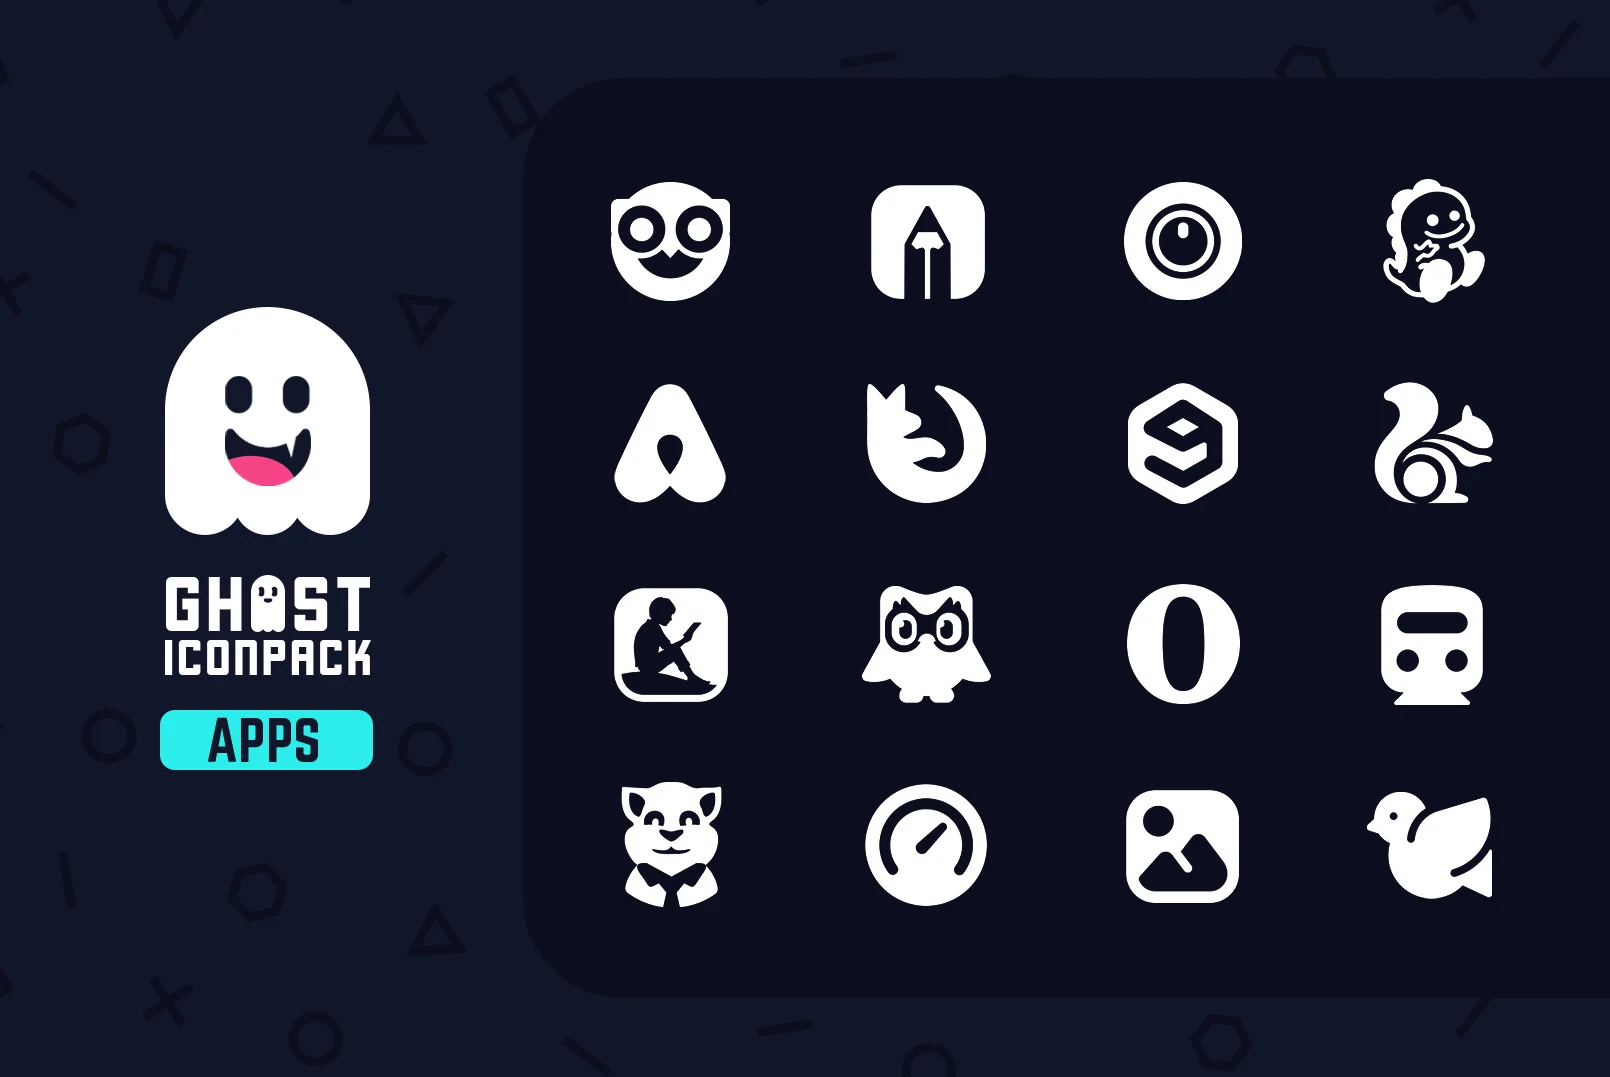 Ghost IconPack Mod Apk Download